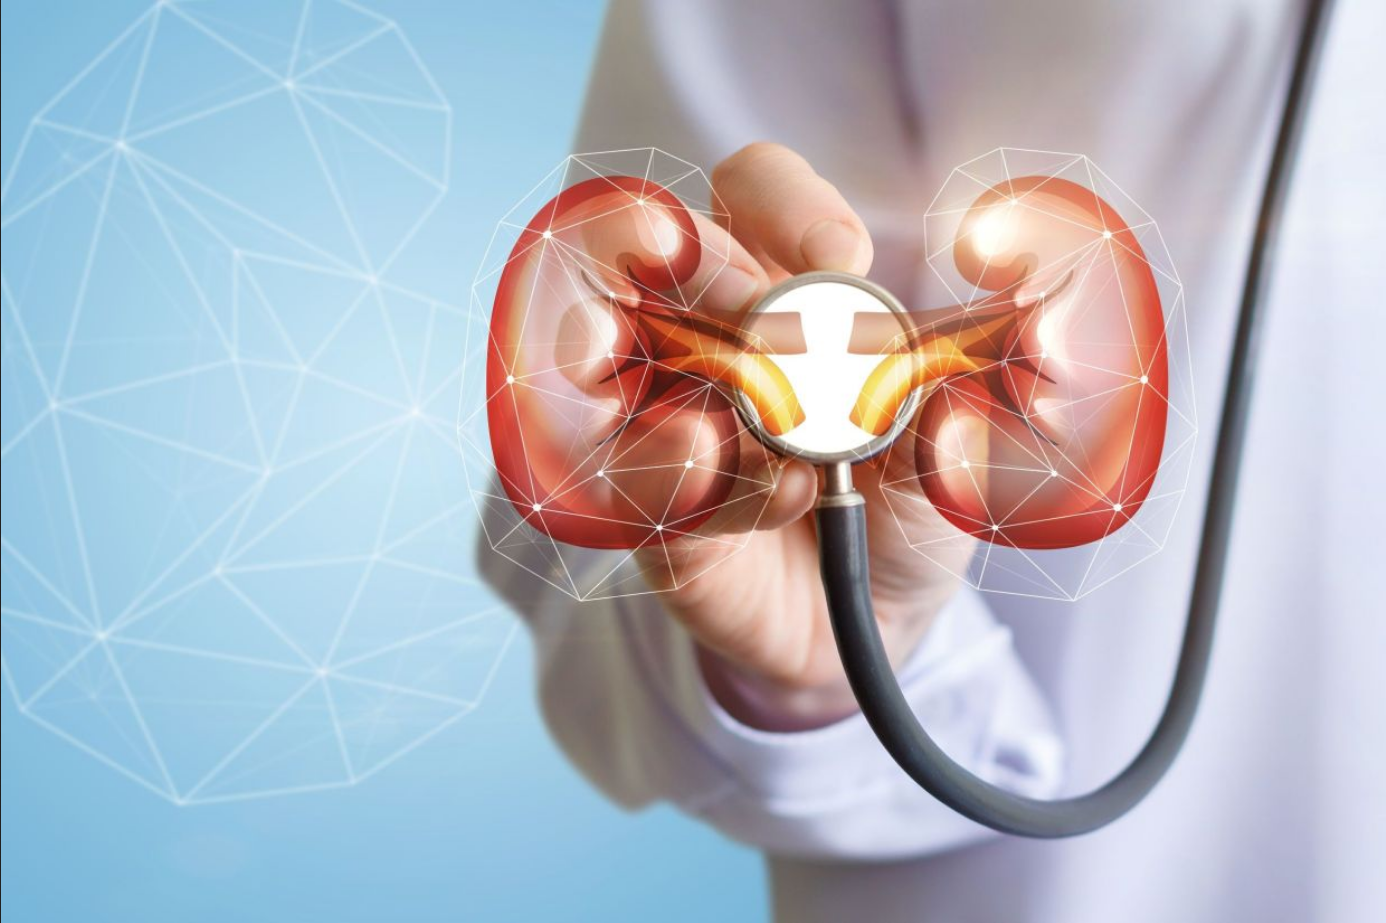 Web-based Covidialysis tracker to the rescue of kidney patients in Mumbai